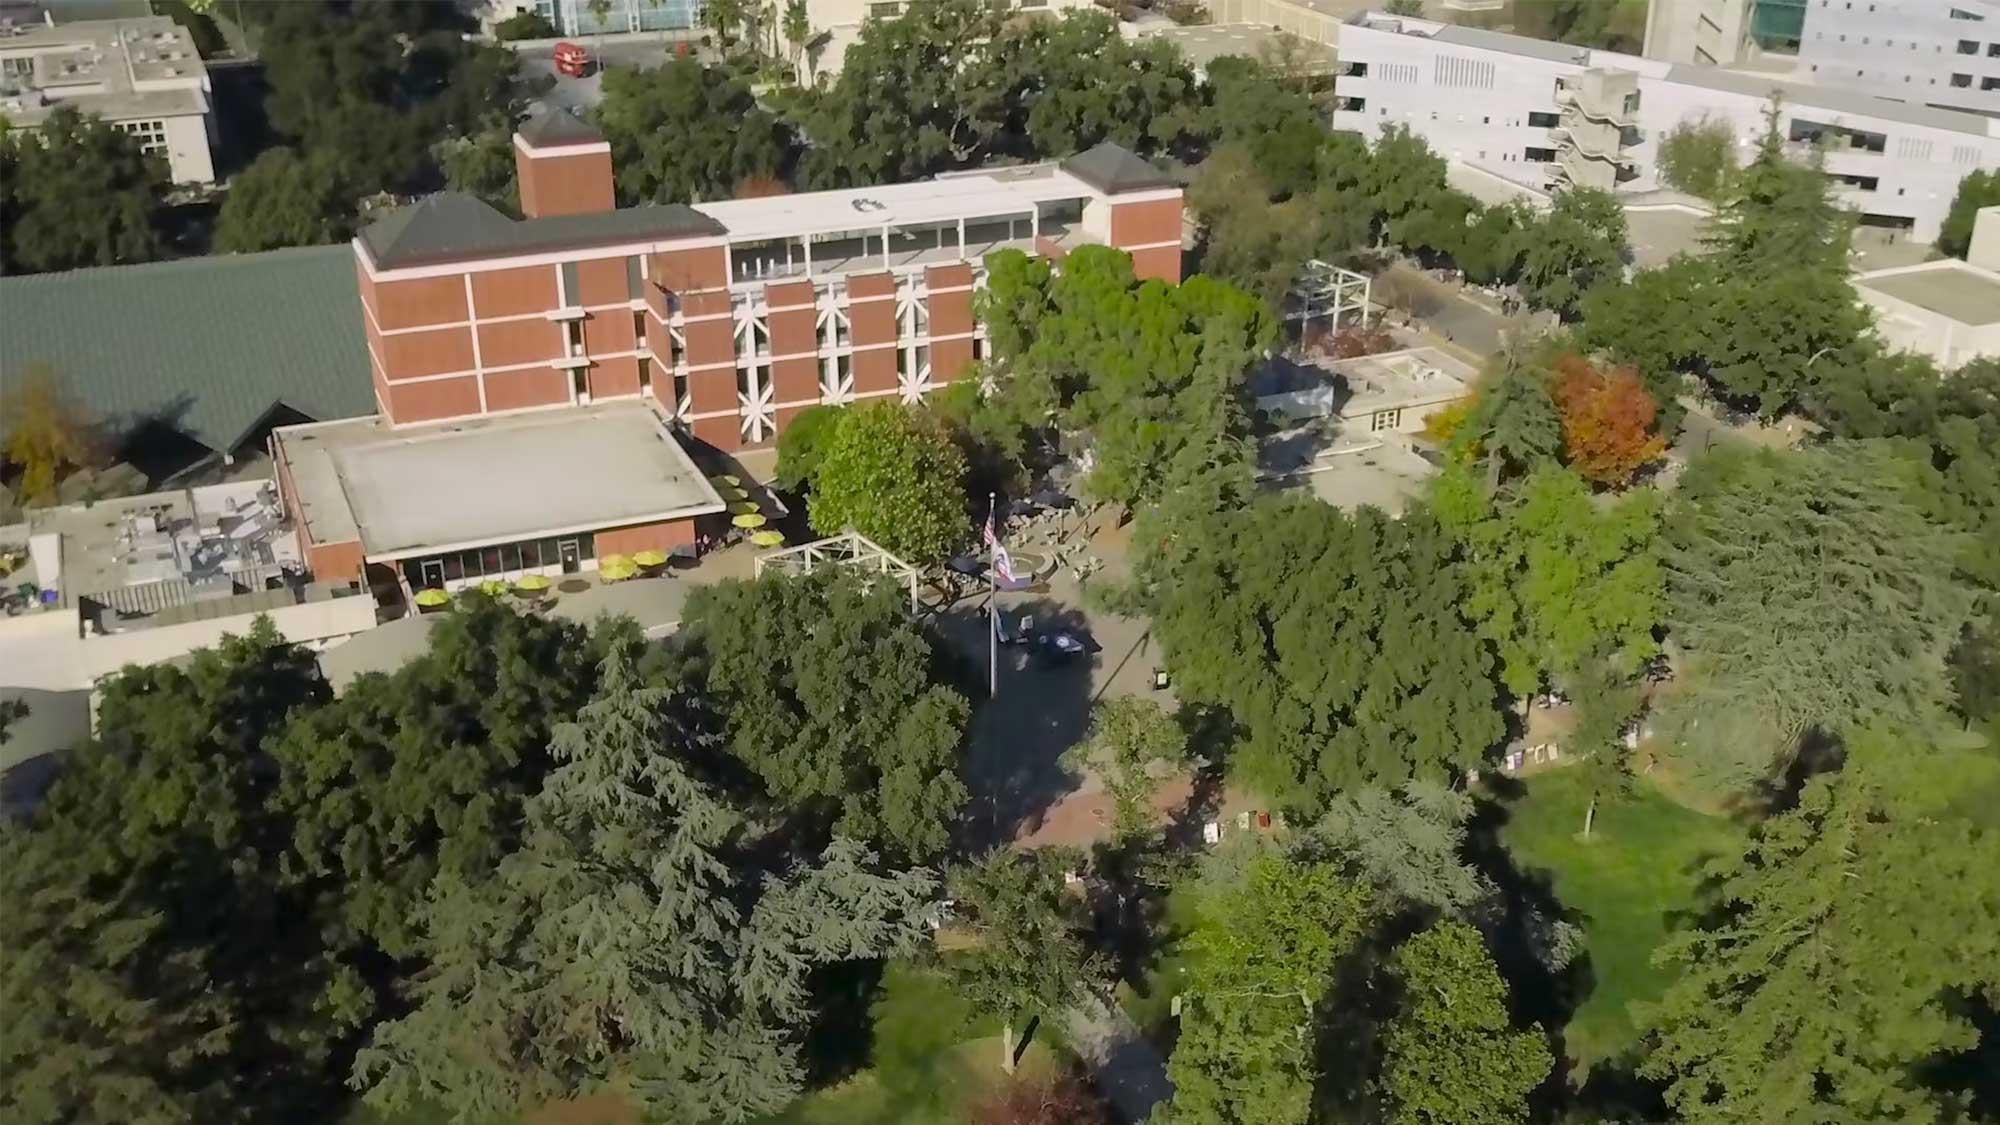 aerial view of the TV campus showing some buildings surrounded by trees